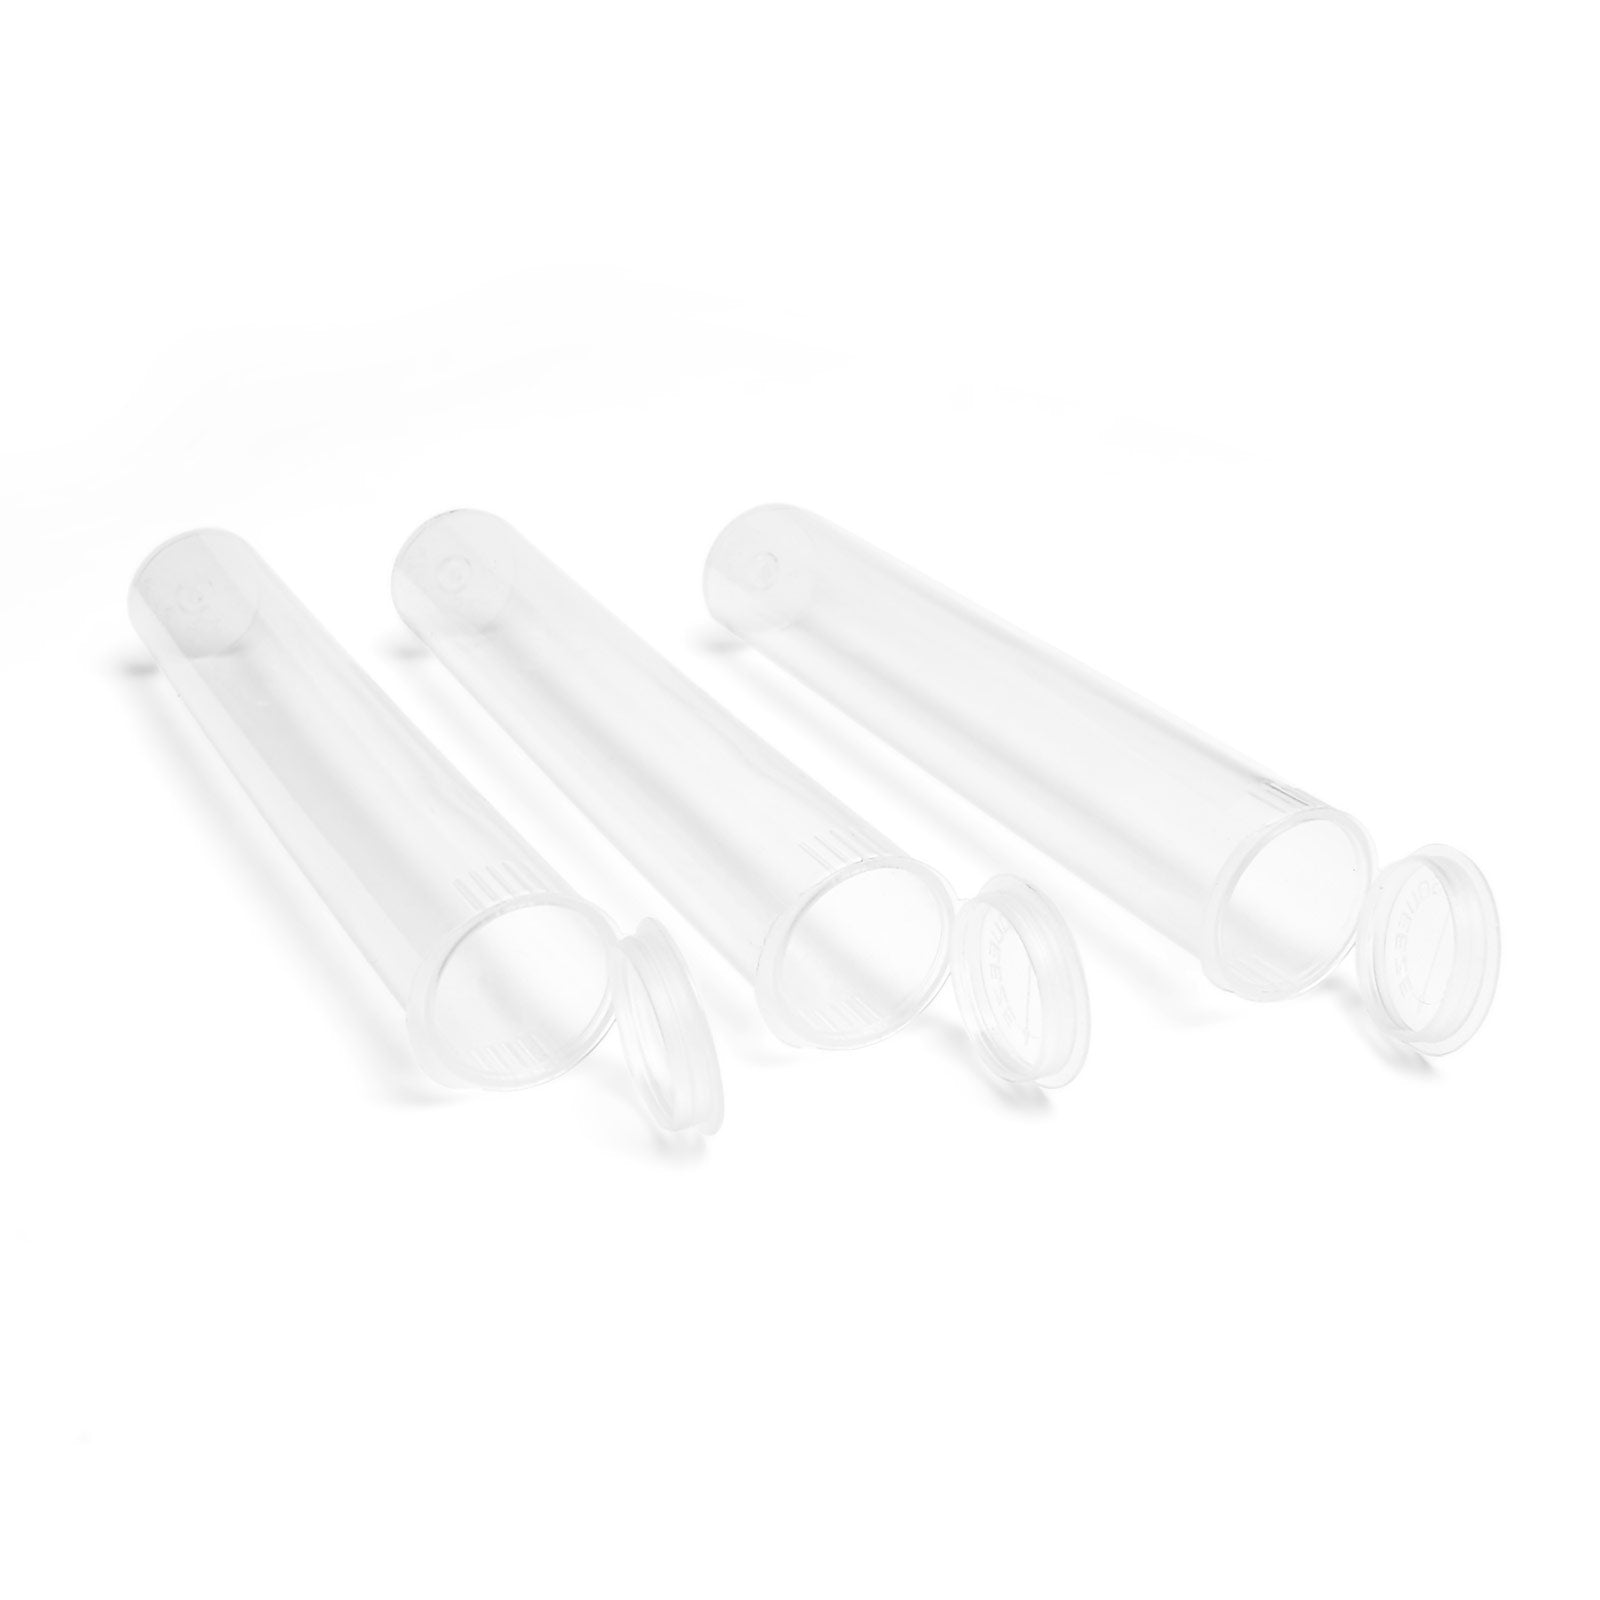 98mm Rx Squeeze Tubes Translucent Clear - 700 Count